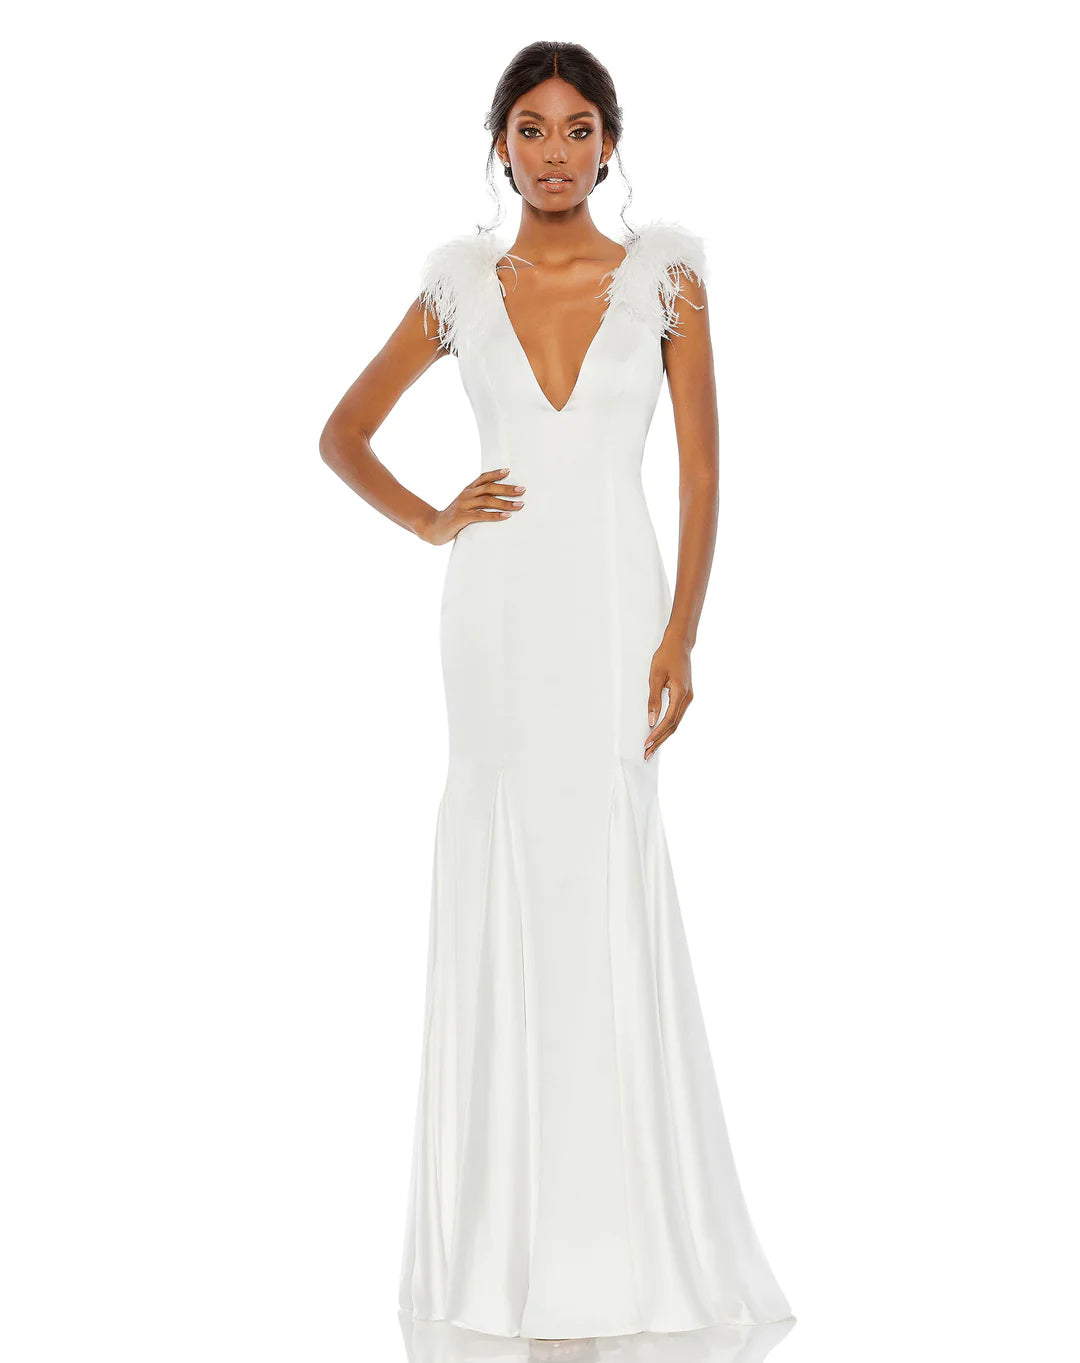 Wedding Dresses & Gowns For Small Bust